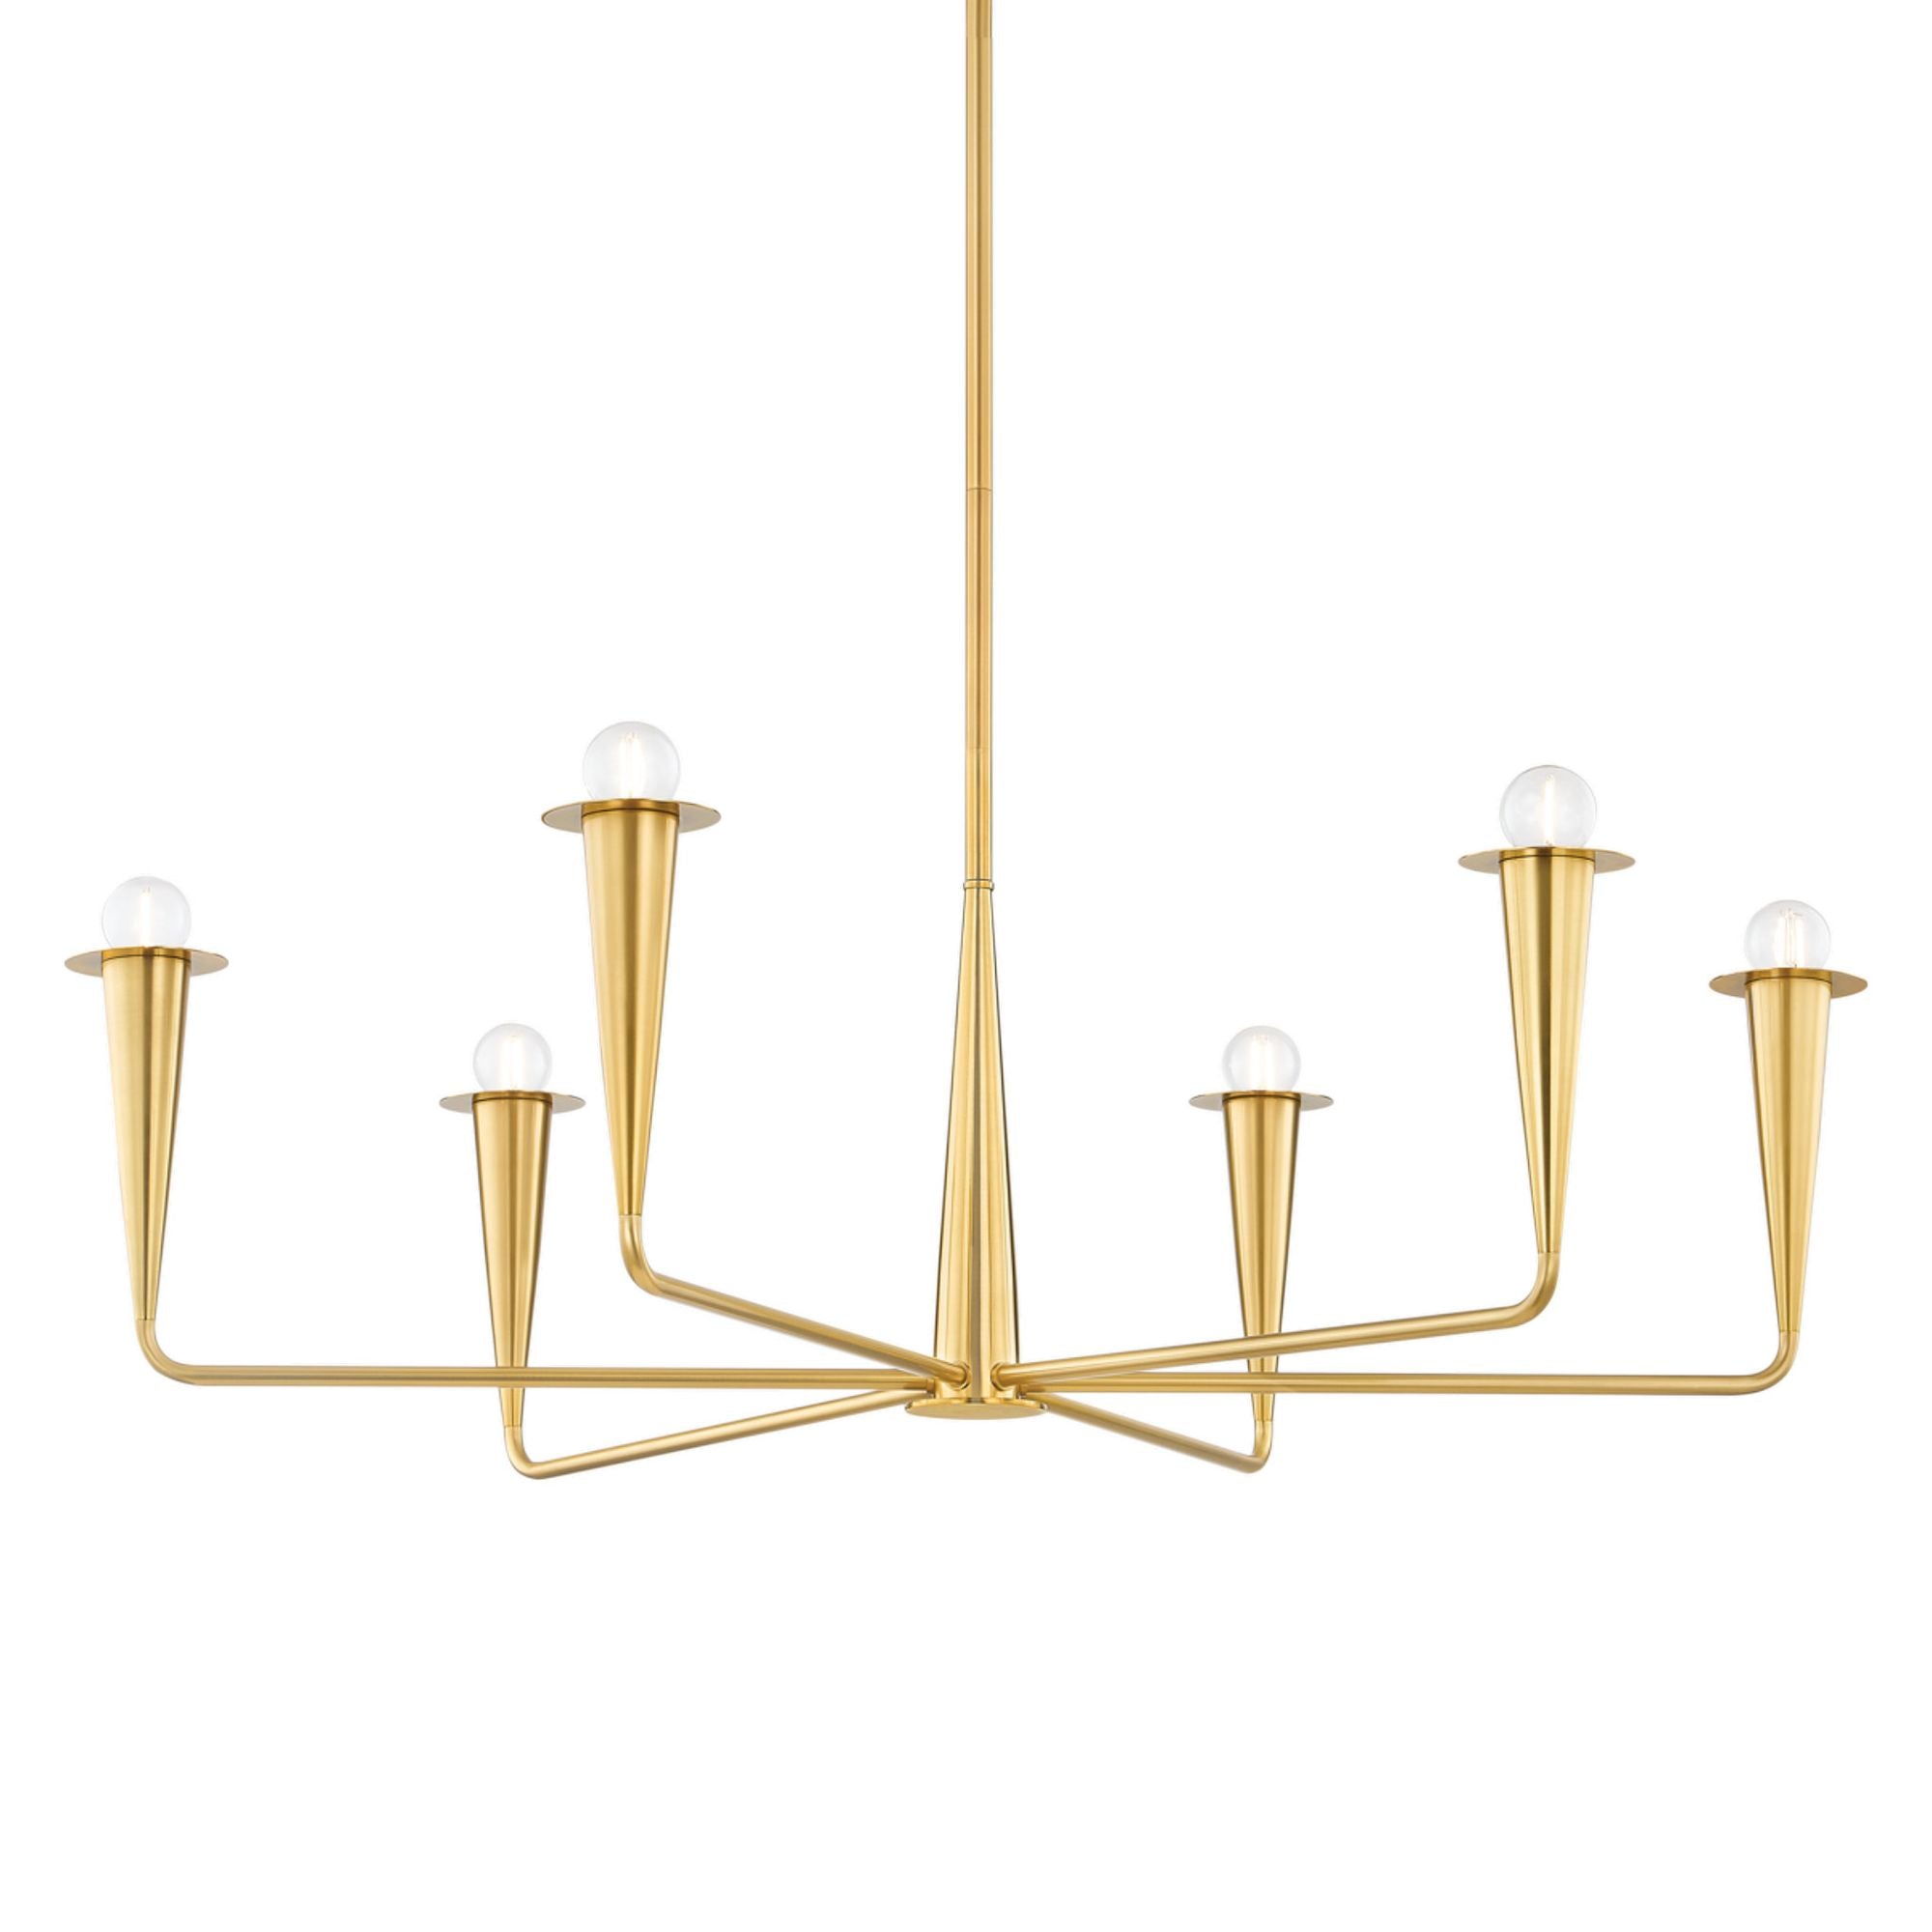 Danna 6-Light Chandelier in Aged Brass by The Lifestyled Co